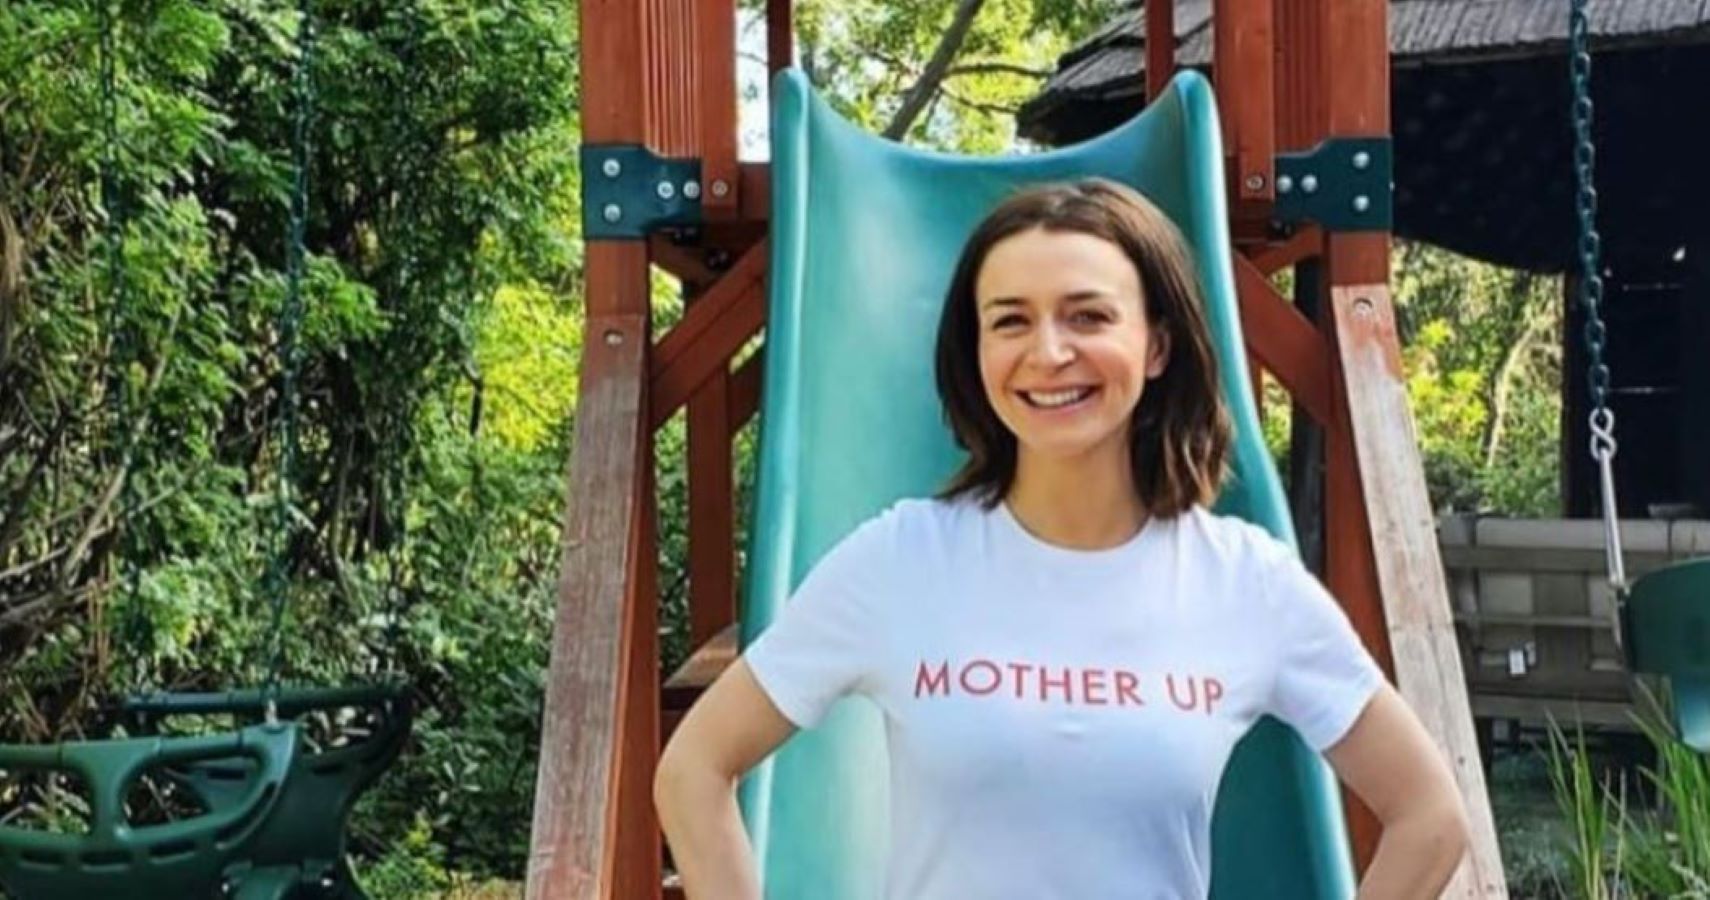 Caterina Scorsone was afraid to deliver daughter with down syndrome